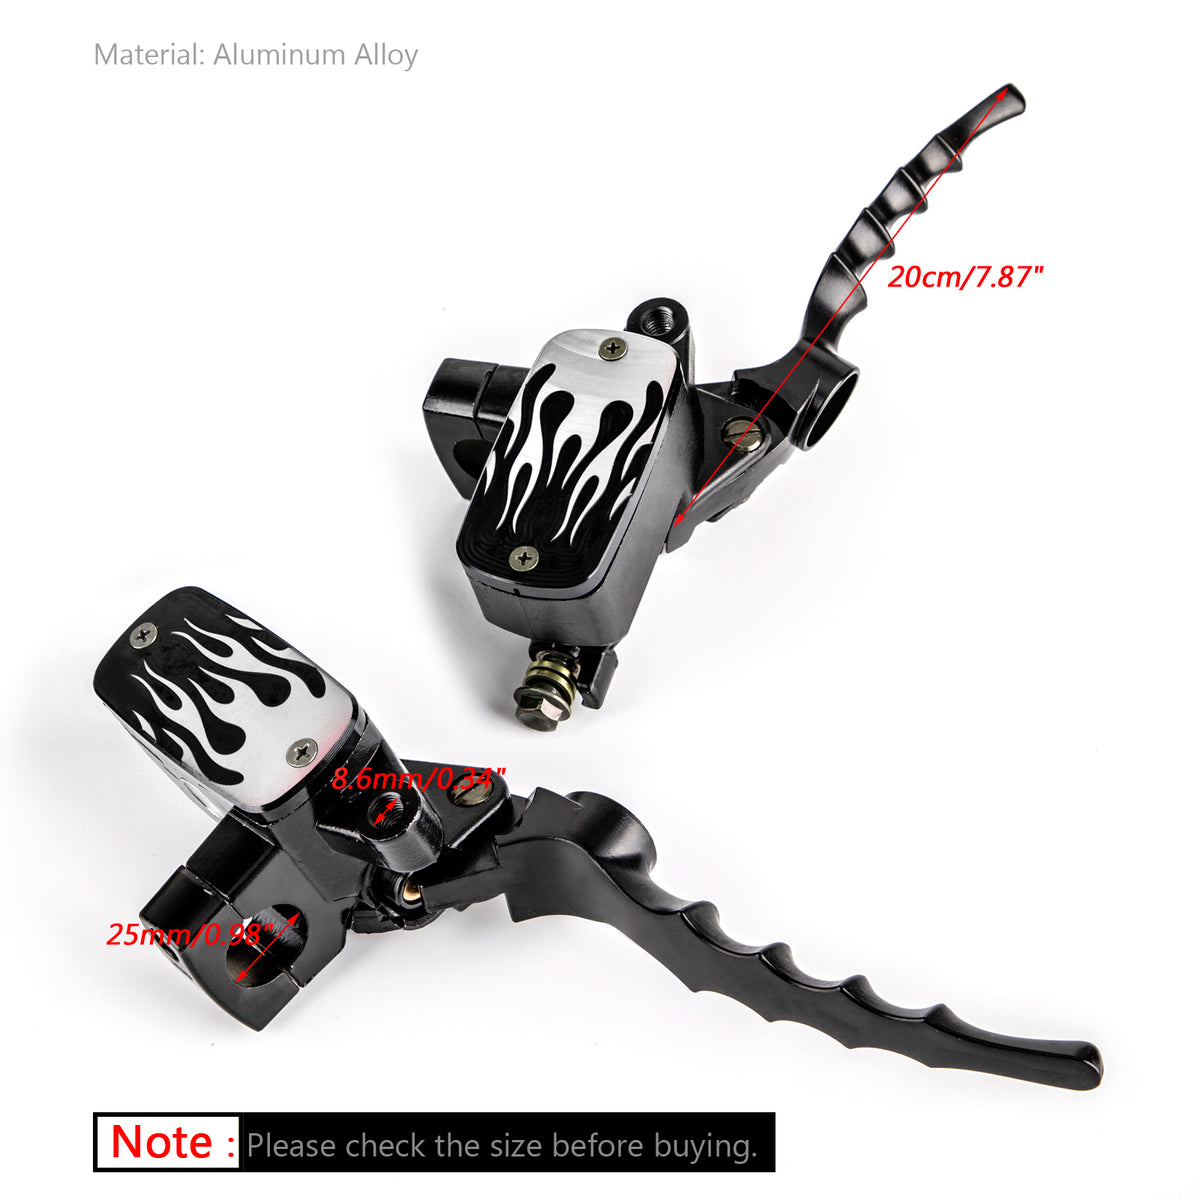 1" Universal Motorcycle Skull Hydraulic Brake Master Cylinder Clutch Levers Generic